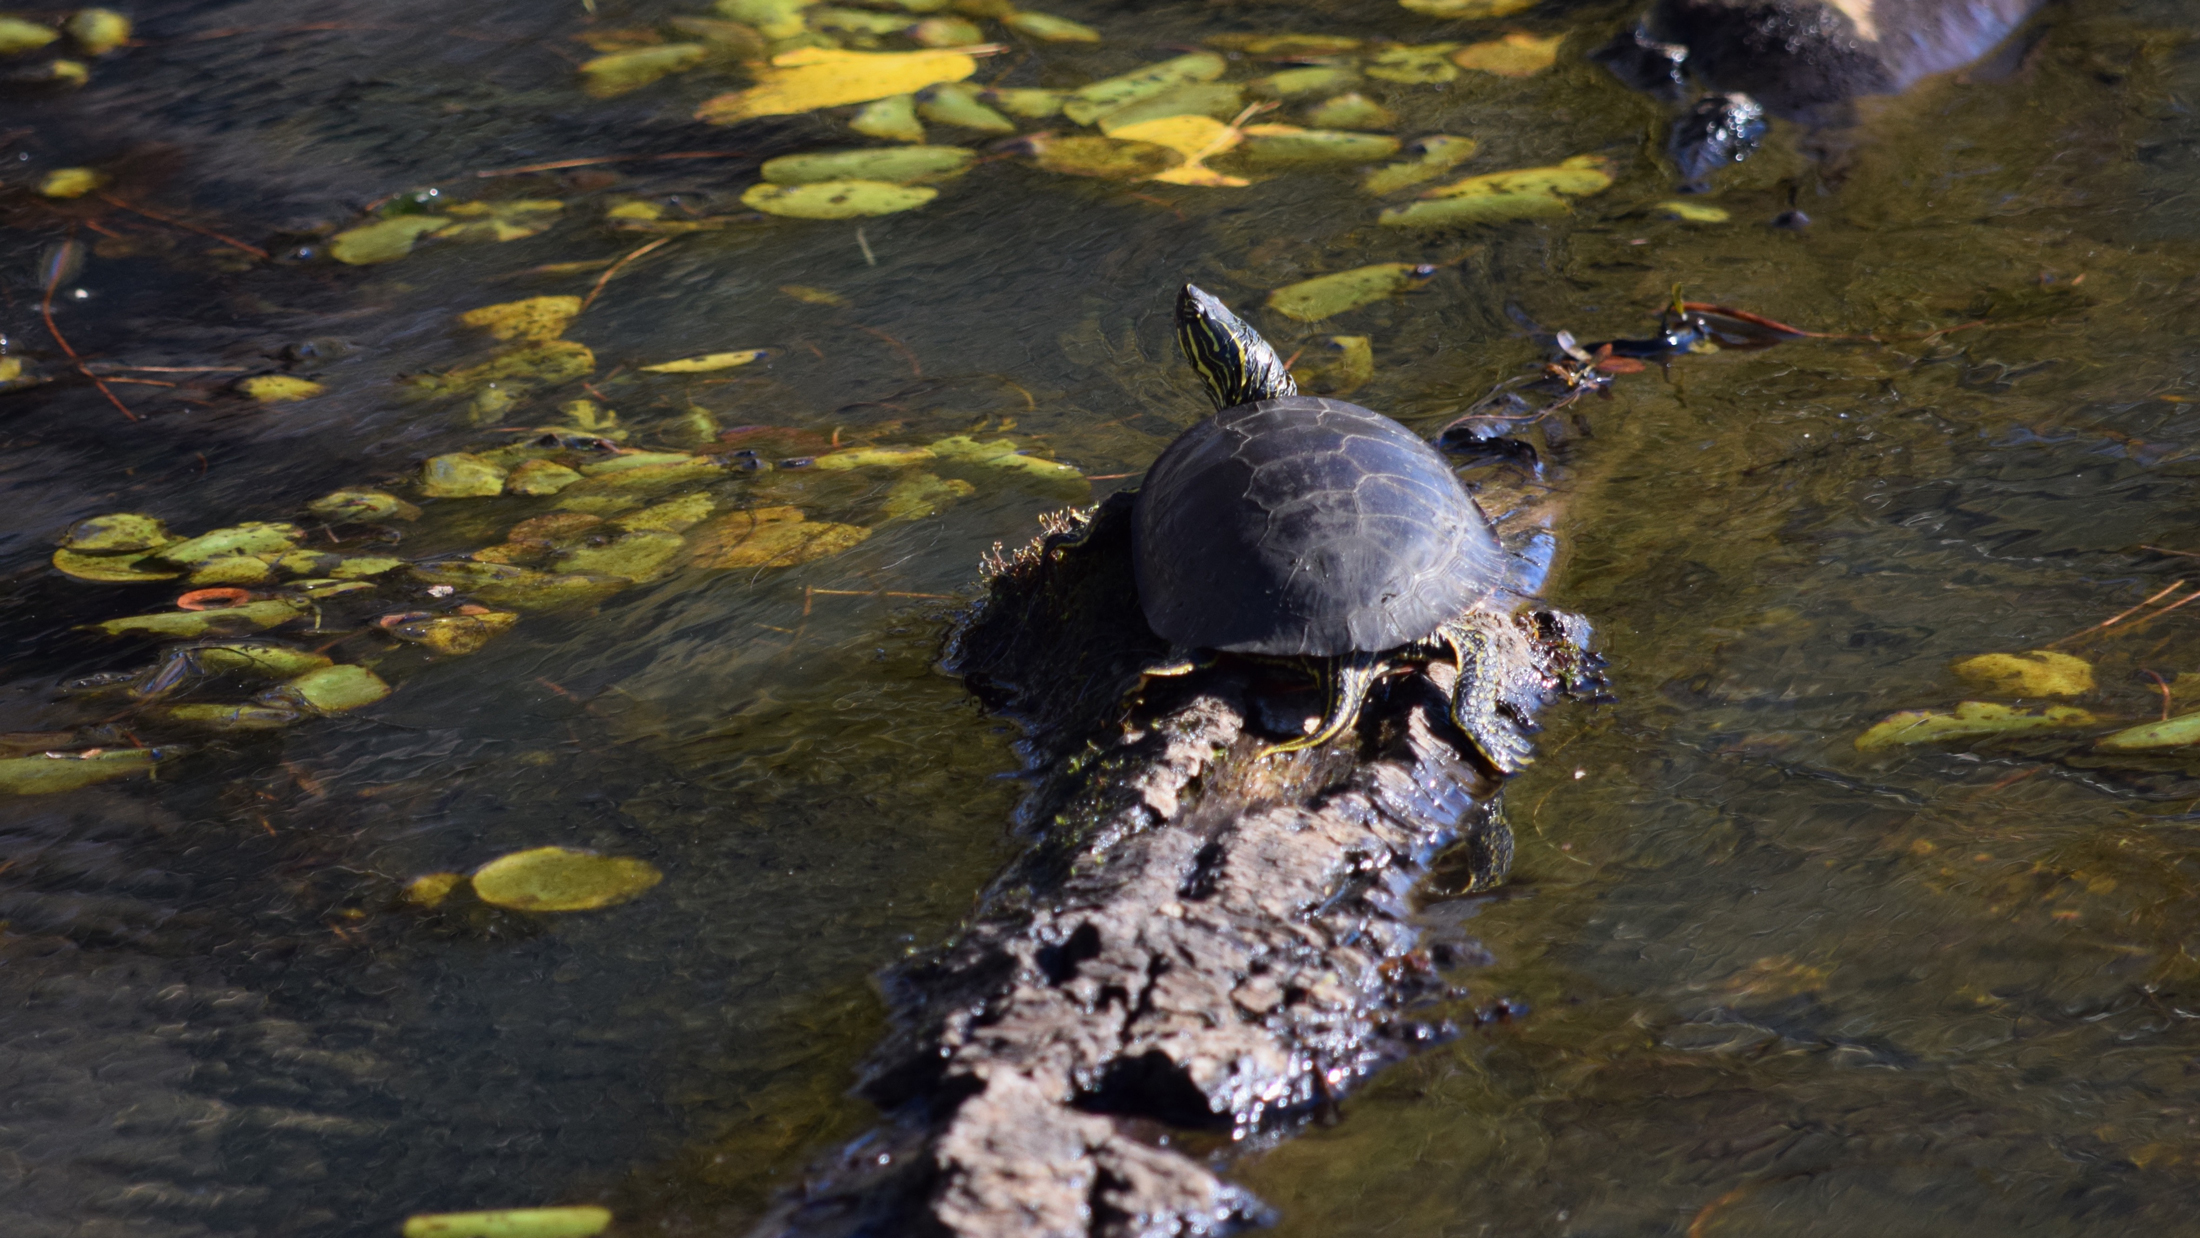 This painted turtle in the Portland, OR area was still active and basking in November. Timing of "hibernation" varies regionally. Photo © The Nature Conservancy (Lisa Feldkamp)